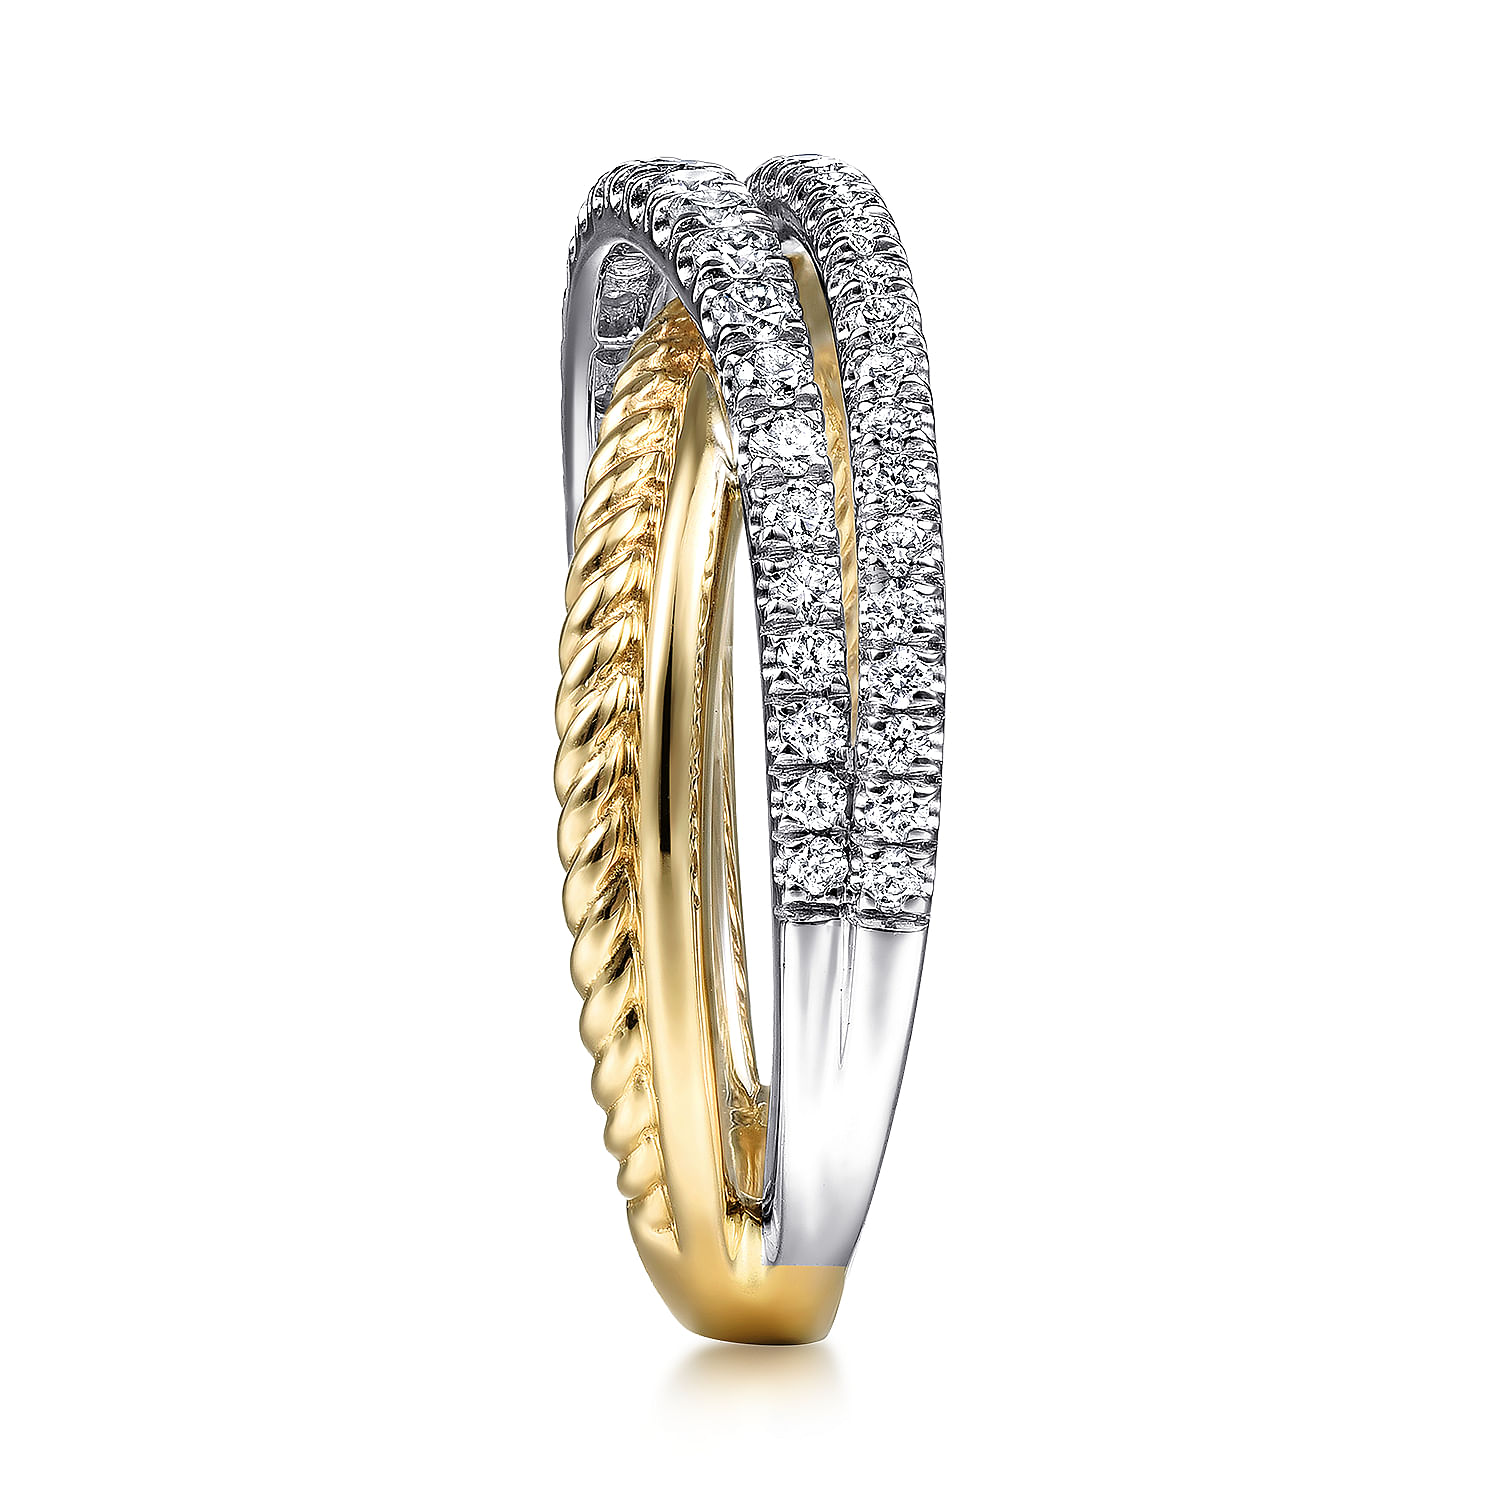 14K White-Yellow Gold Twisted Rope and Diamond Criss Cross Ring